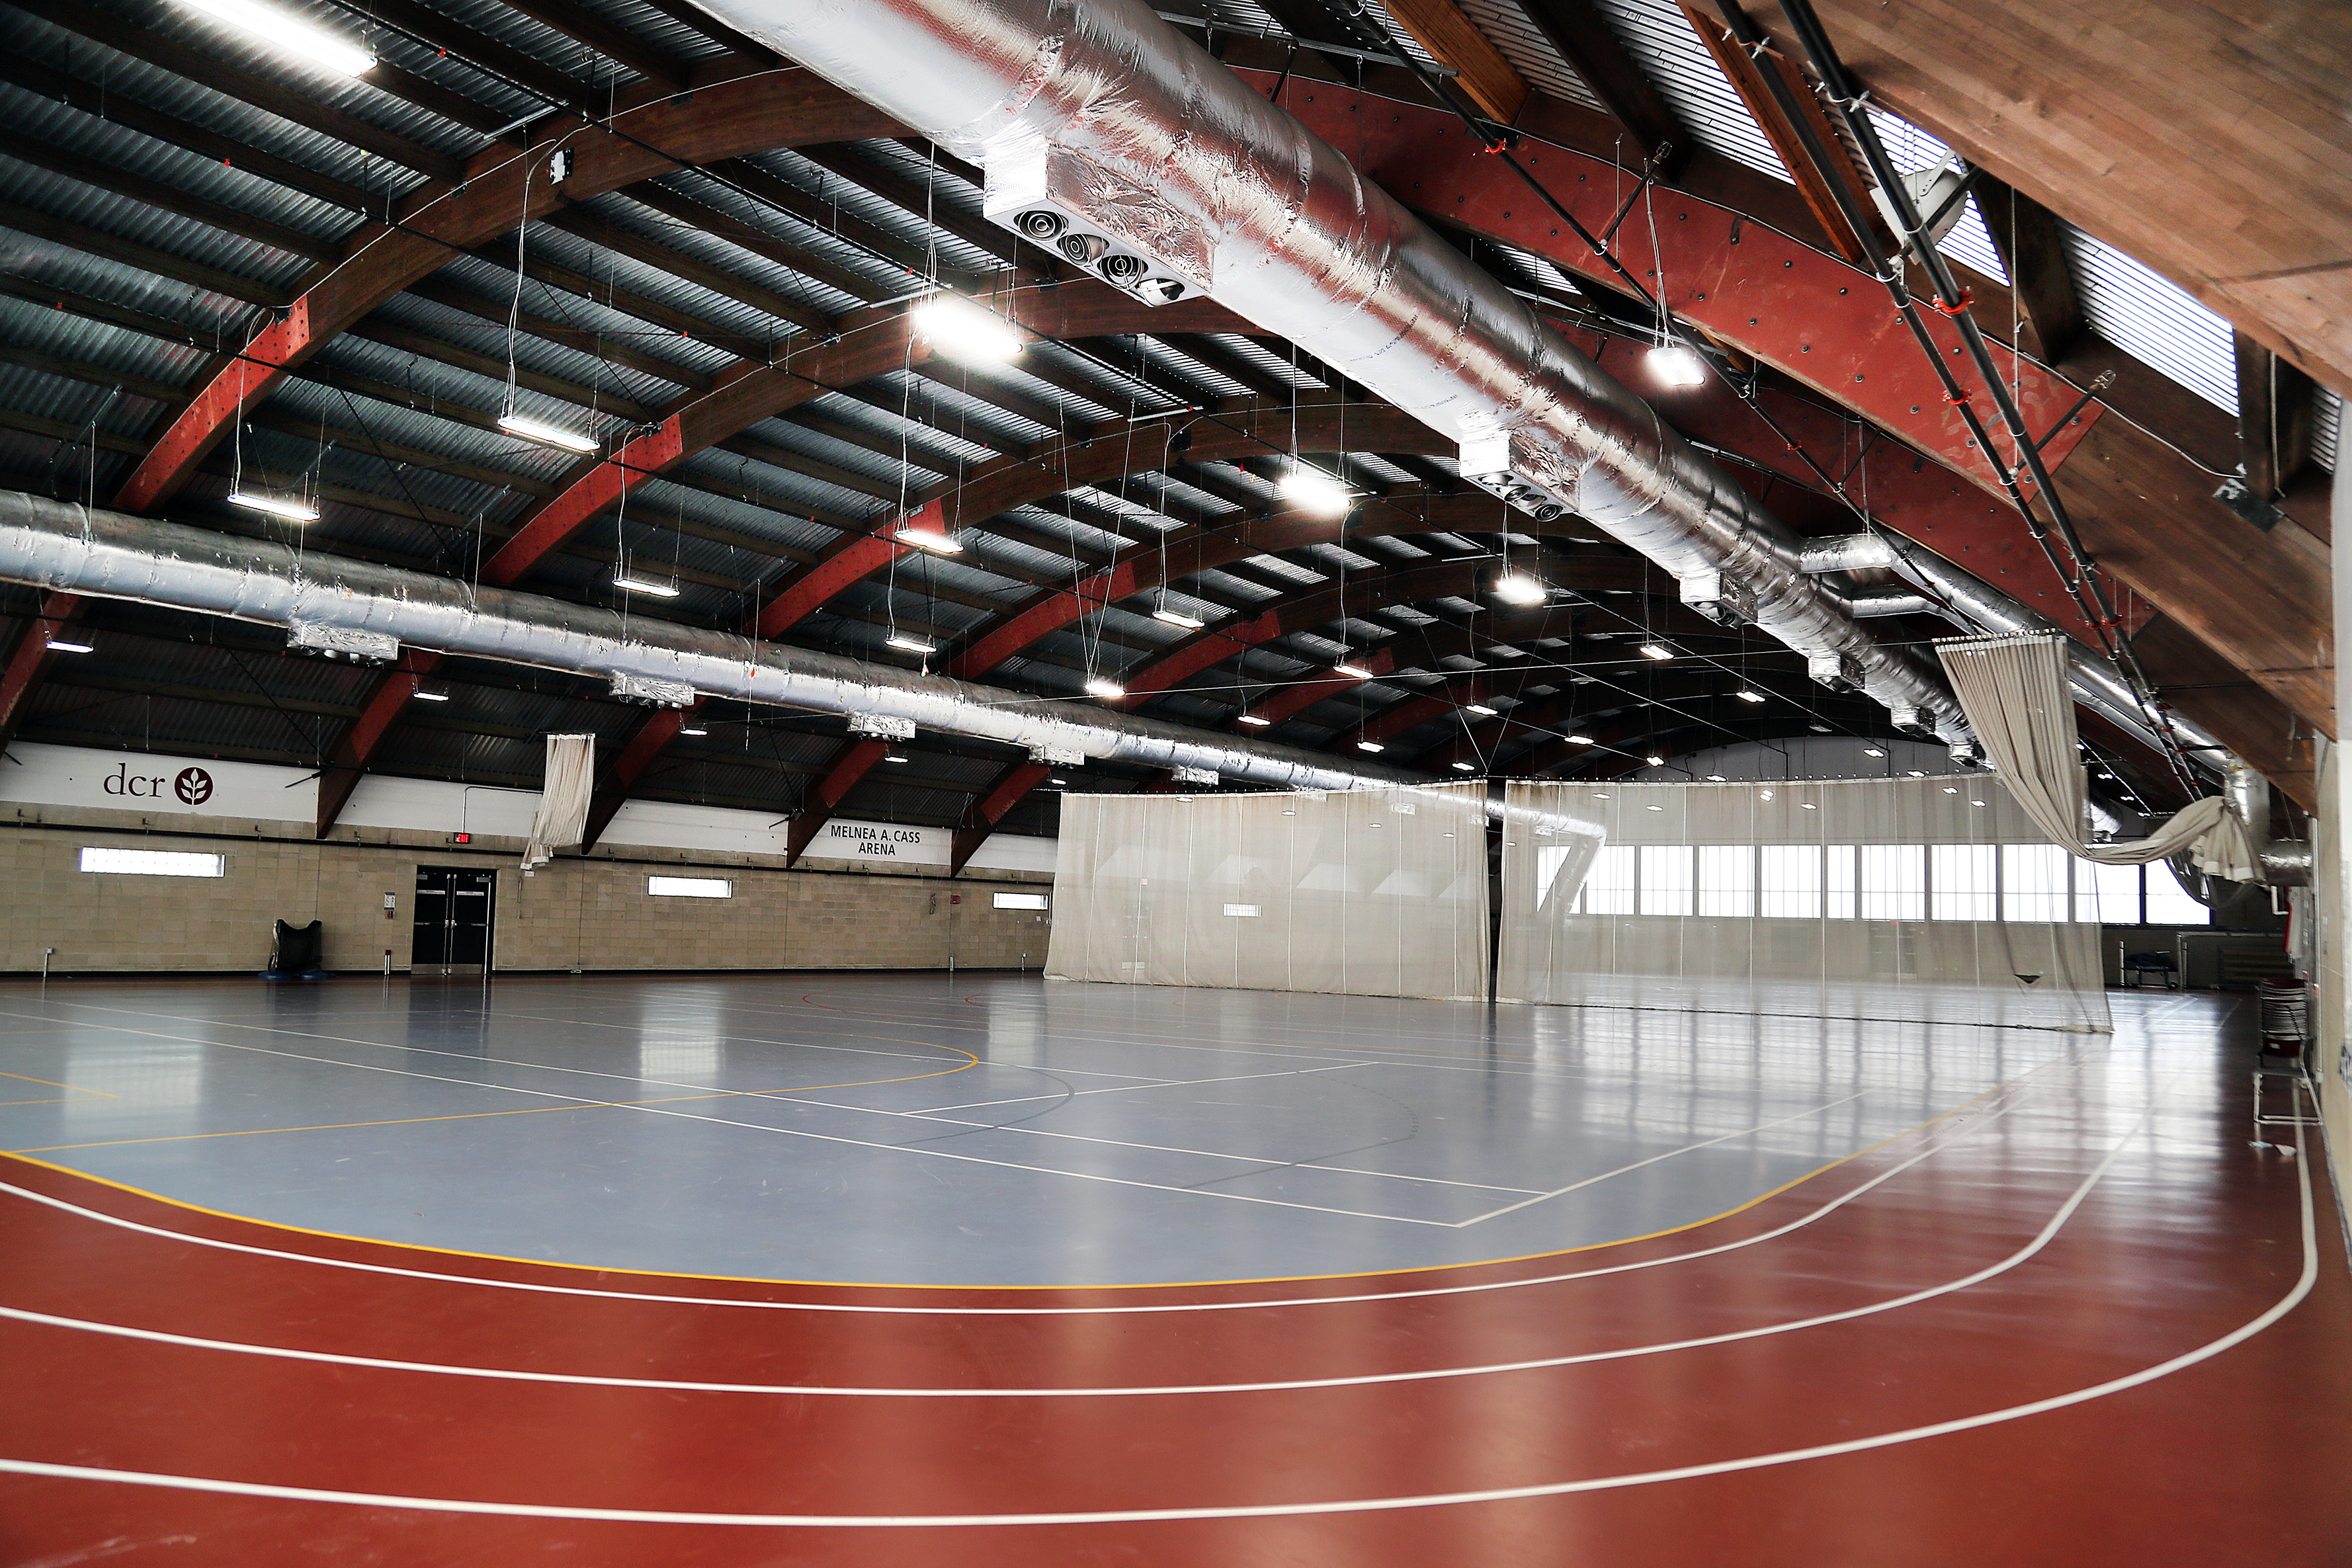 With migrant shelter at Roxbury center, track club finds new home